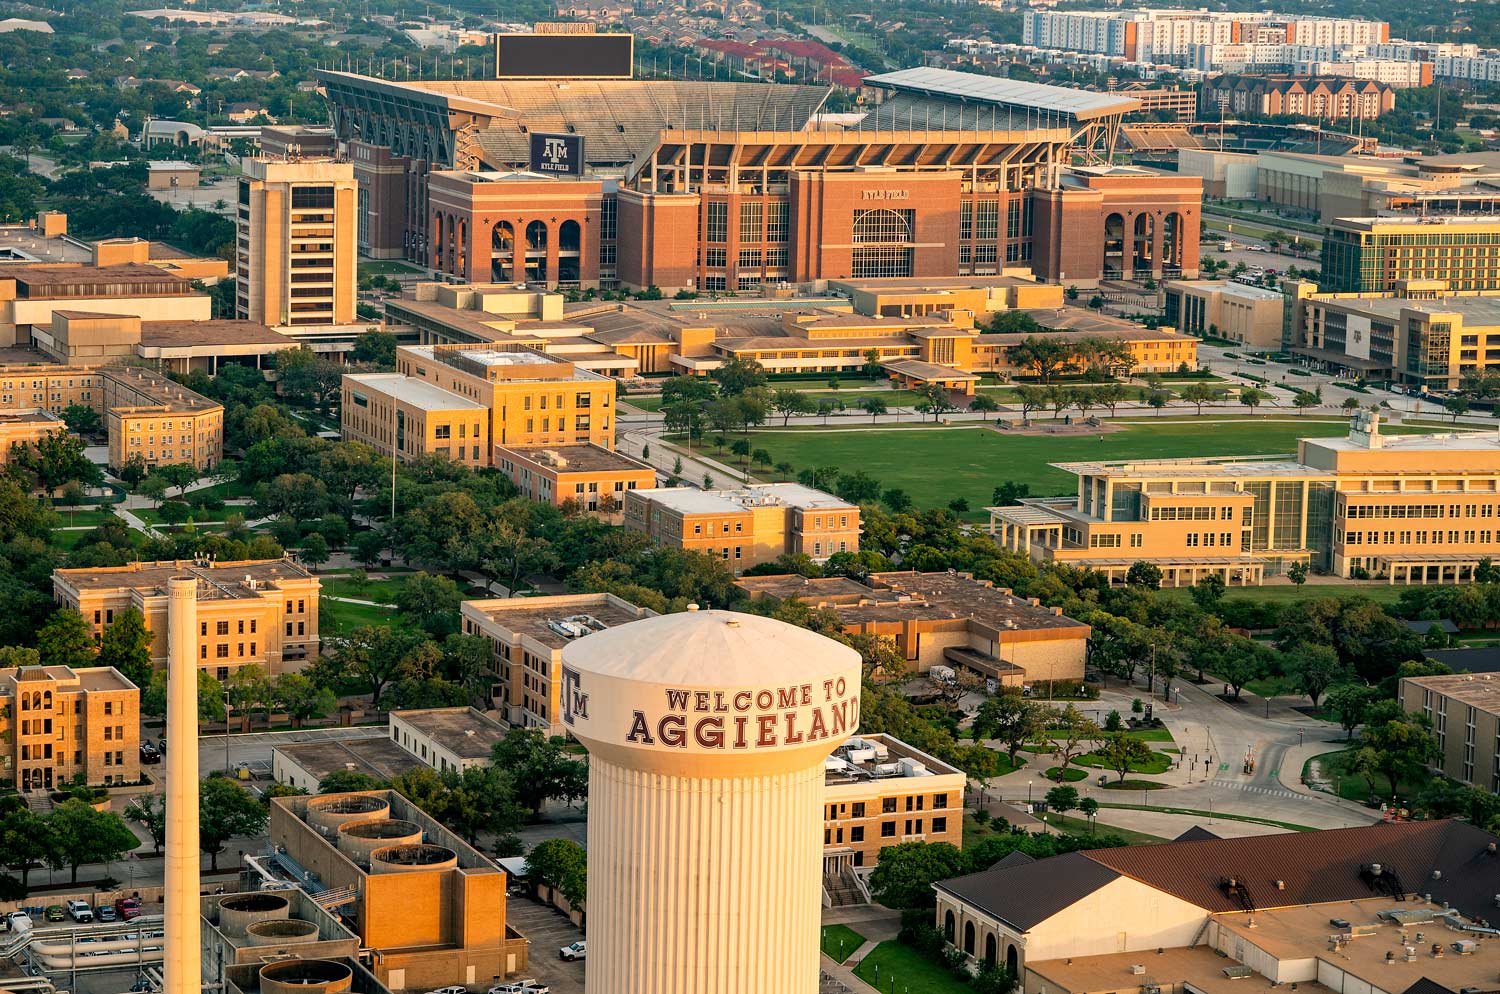 Aerial view of the ϲʹ̳ University - College Station campus